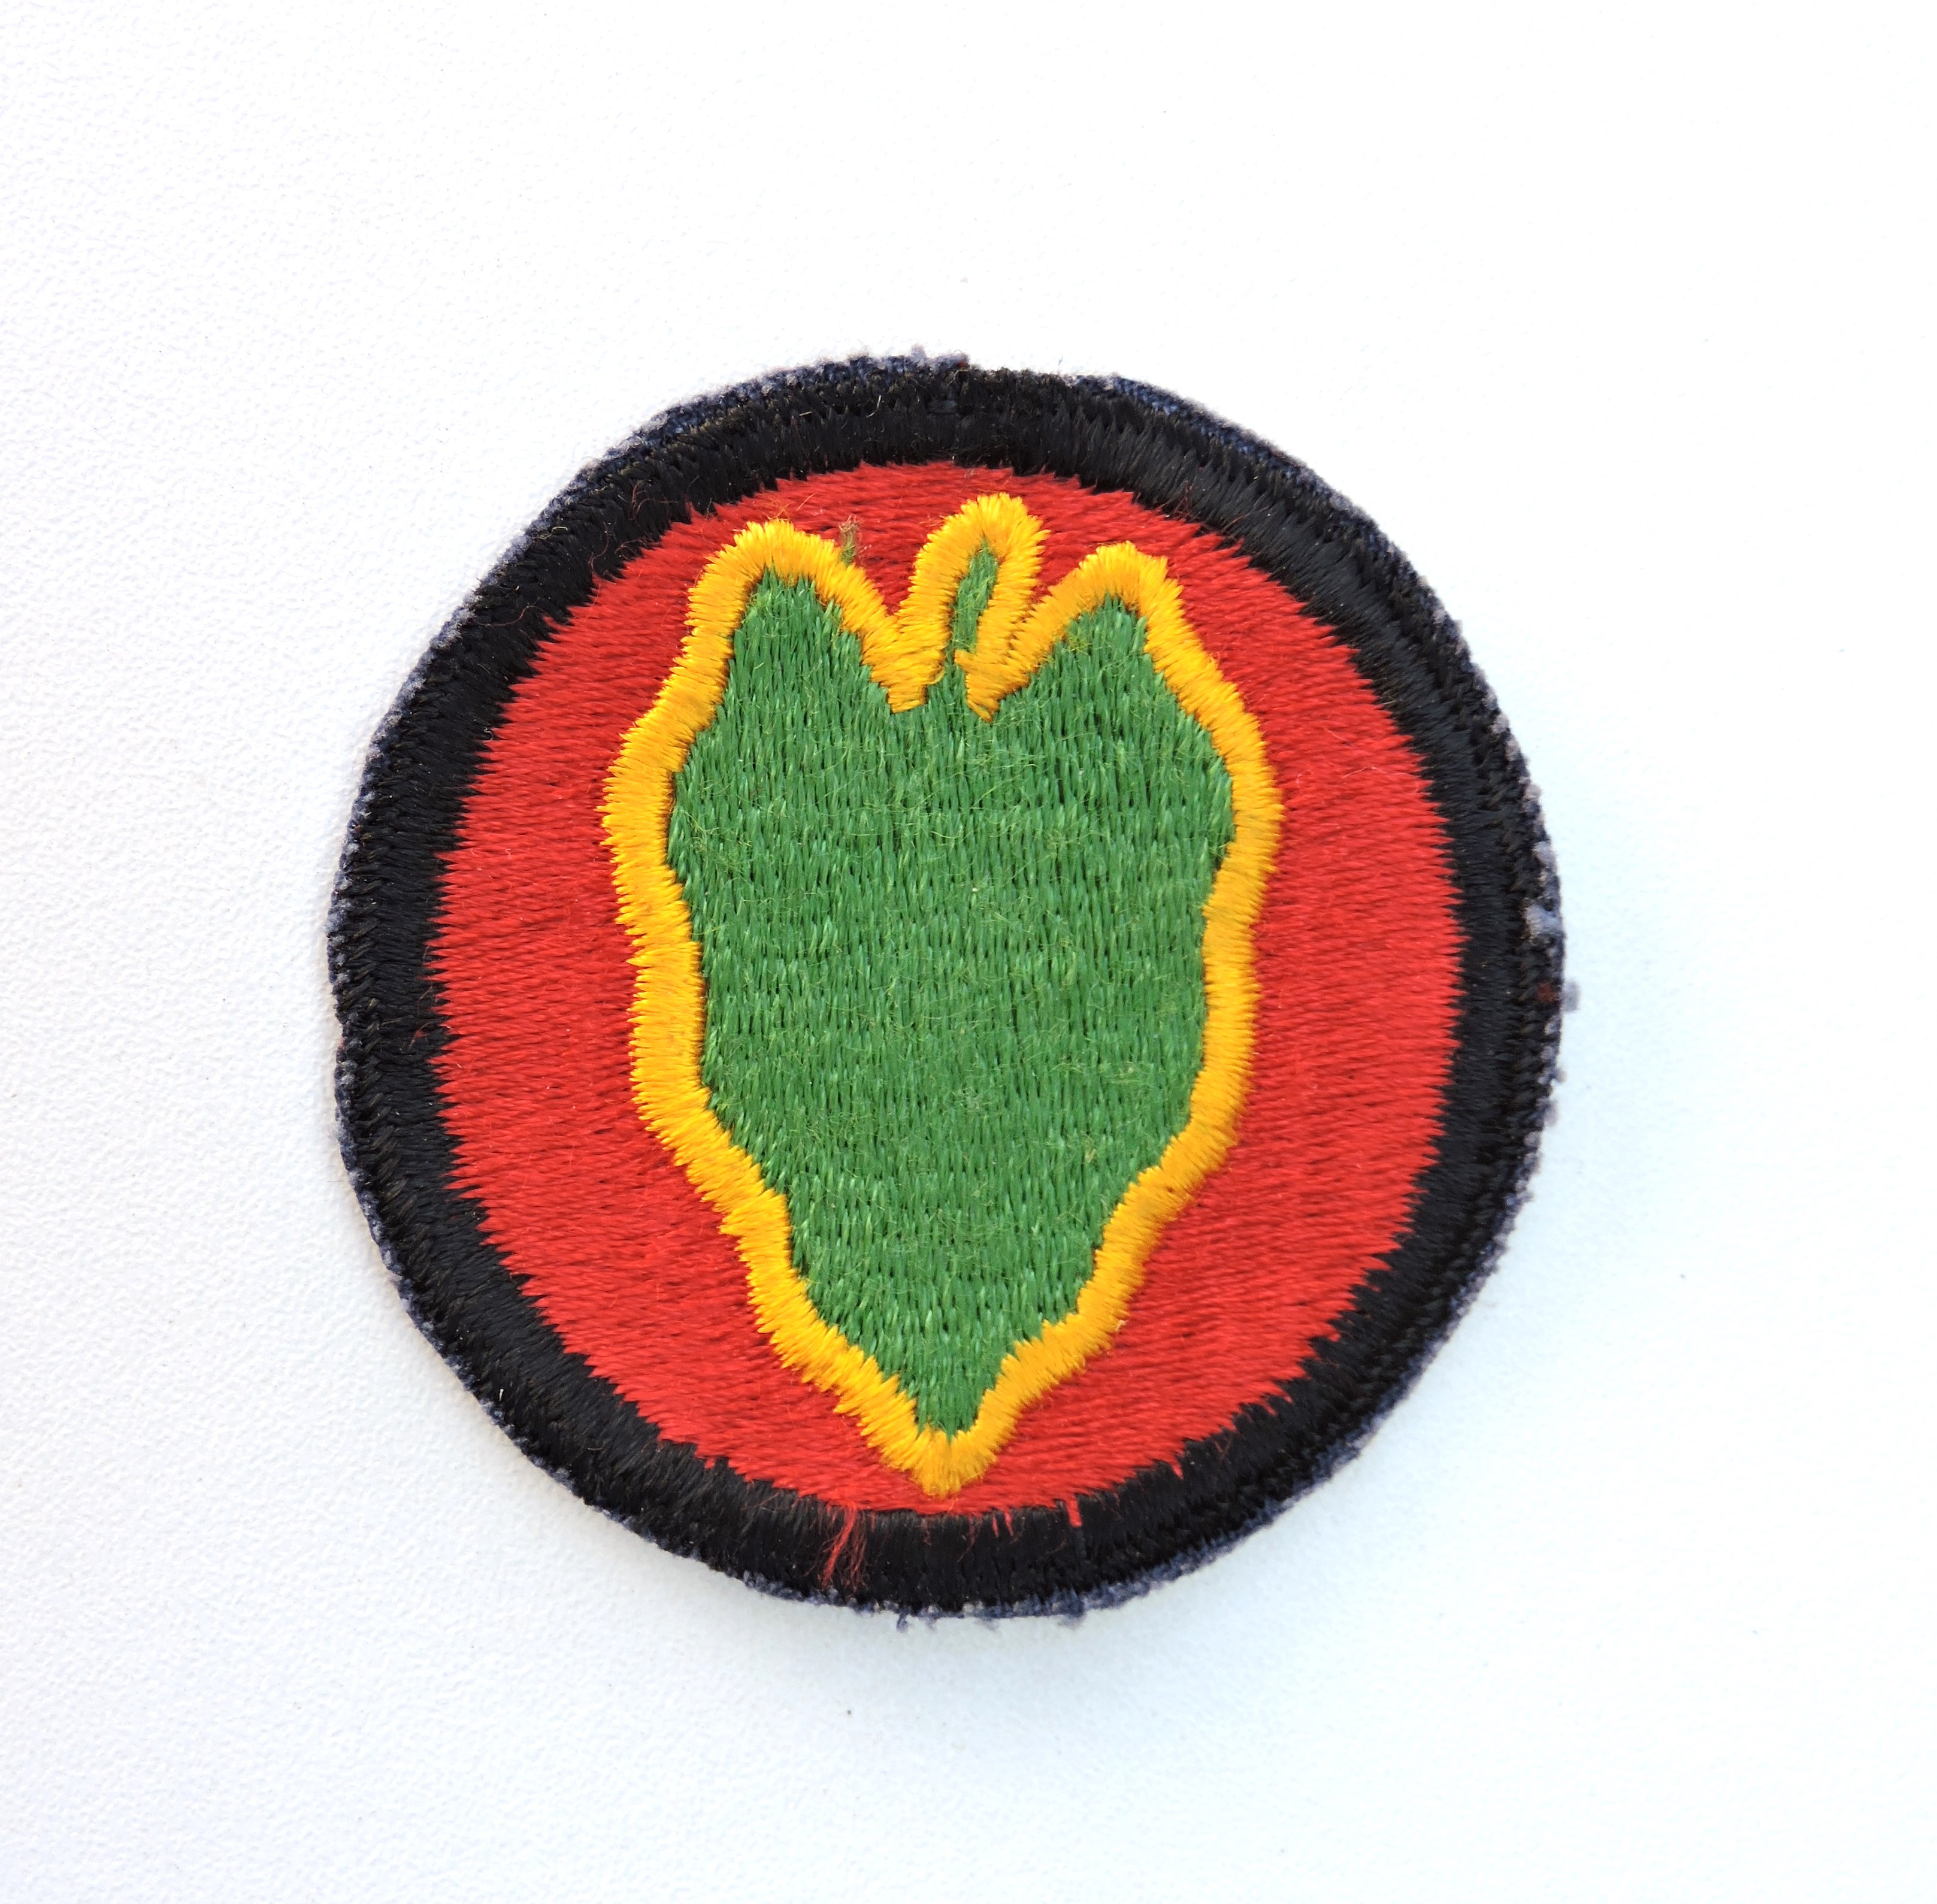 Patch US  24th infantry division